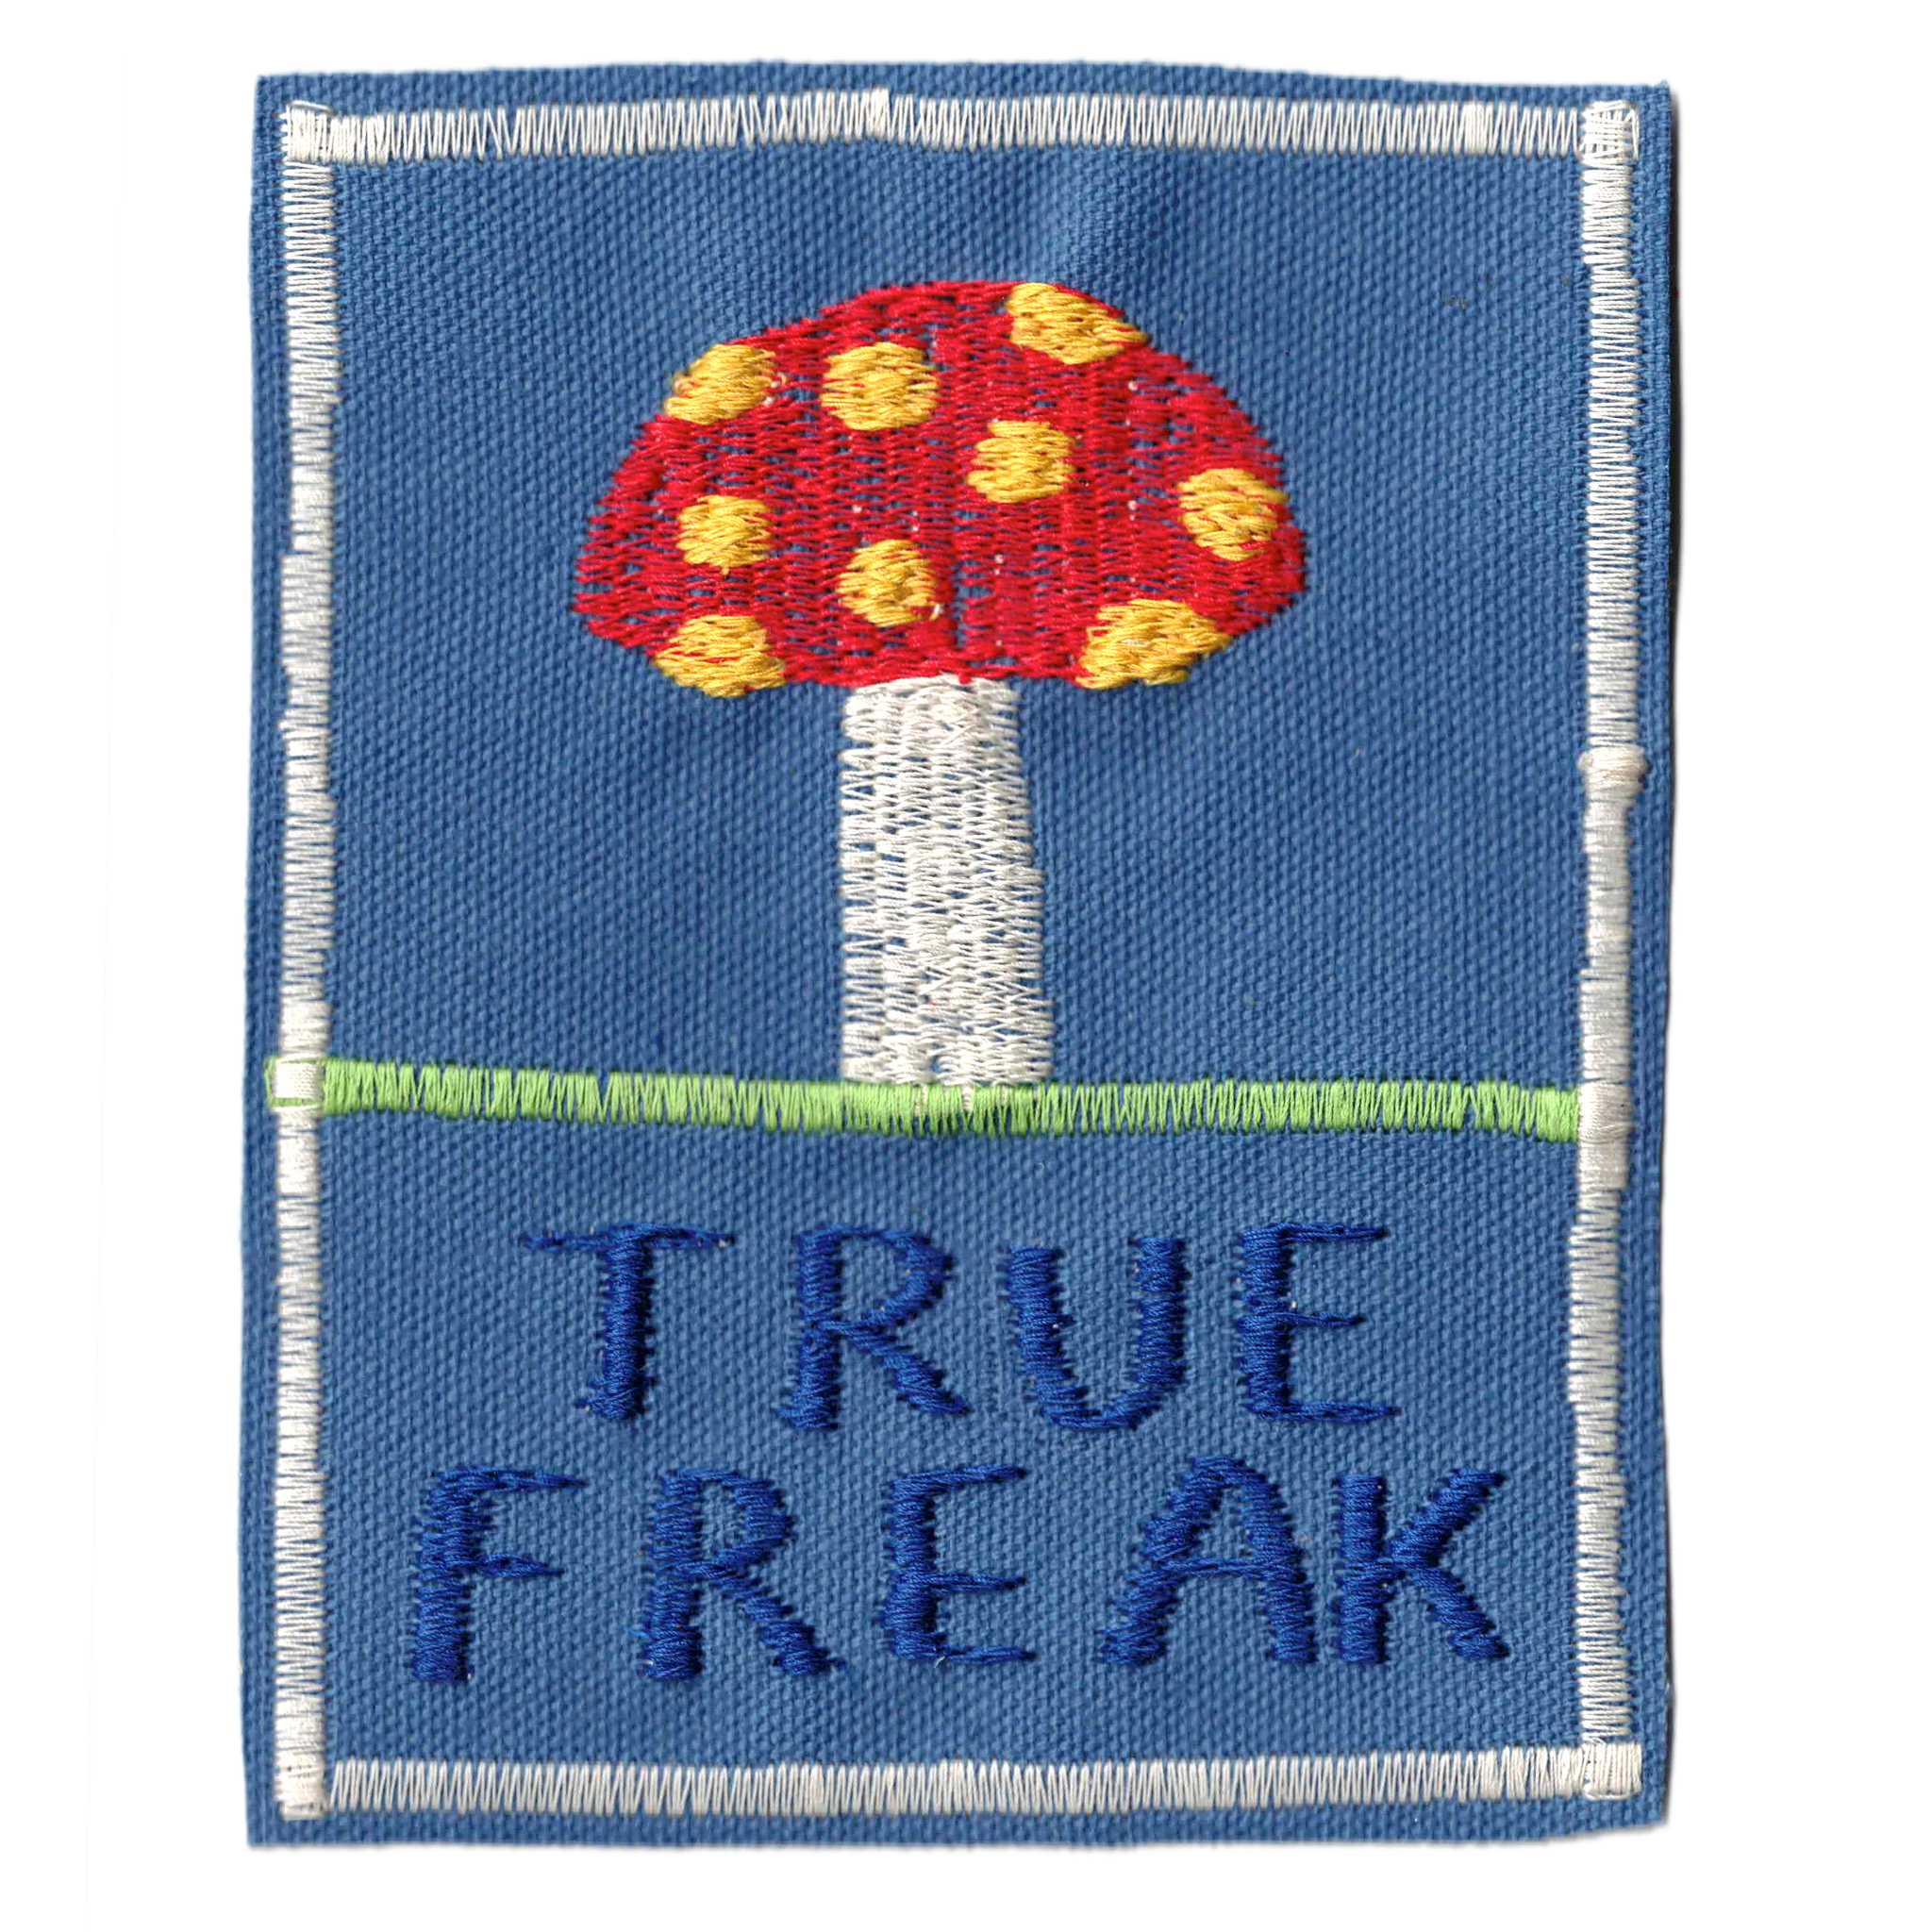 Freehand embroidered patch (one)